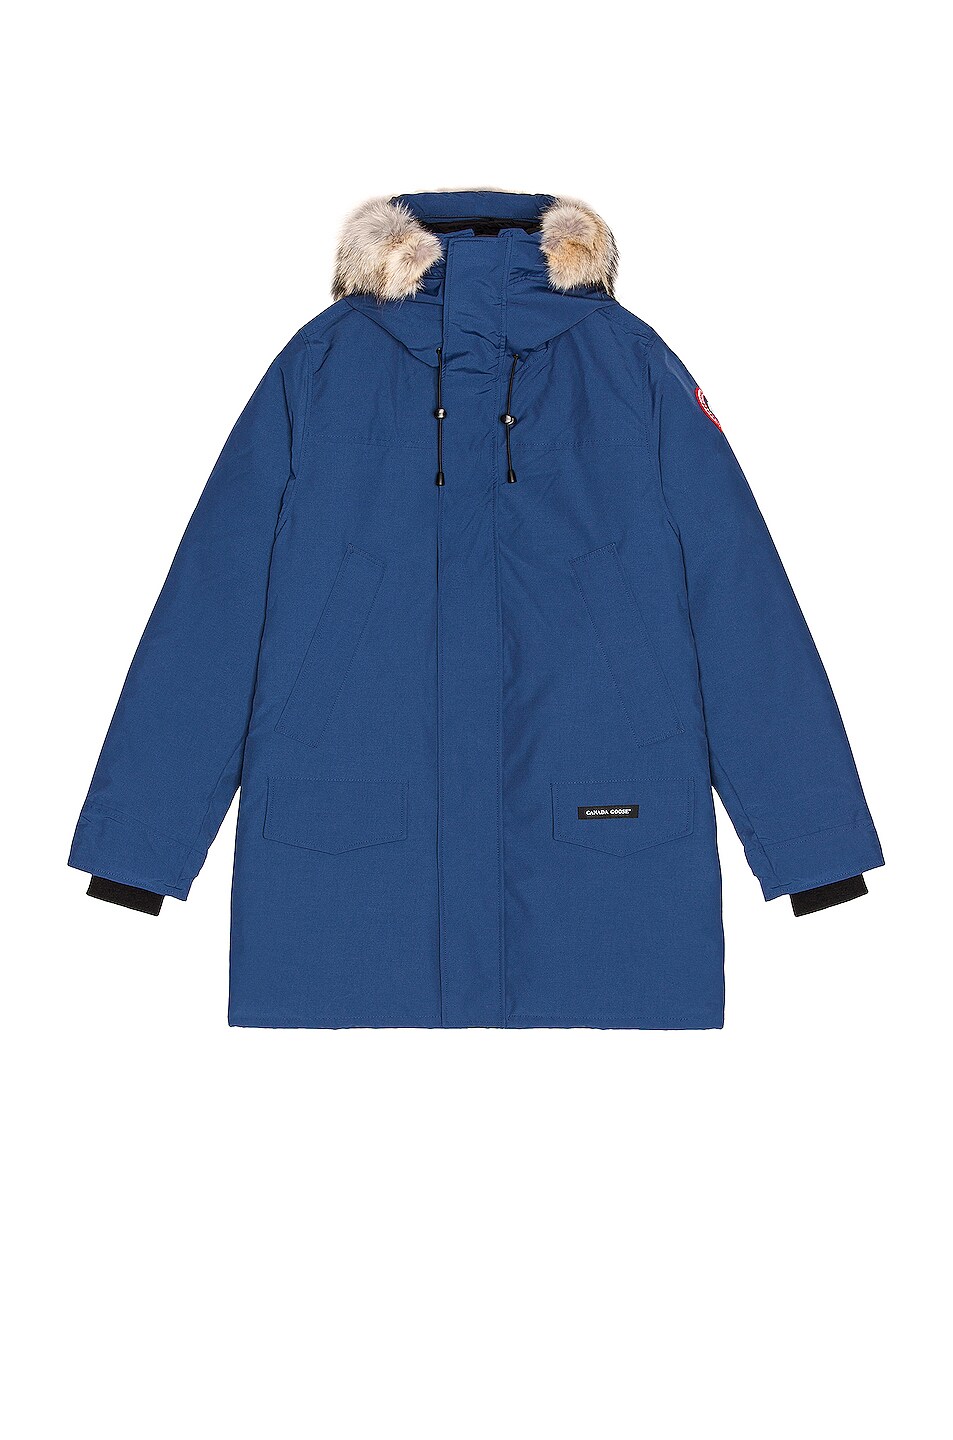 Image 1 of Canada Goose Langford Jacket in Northern Night